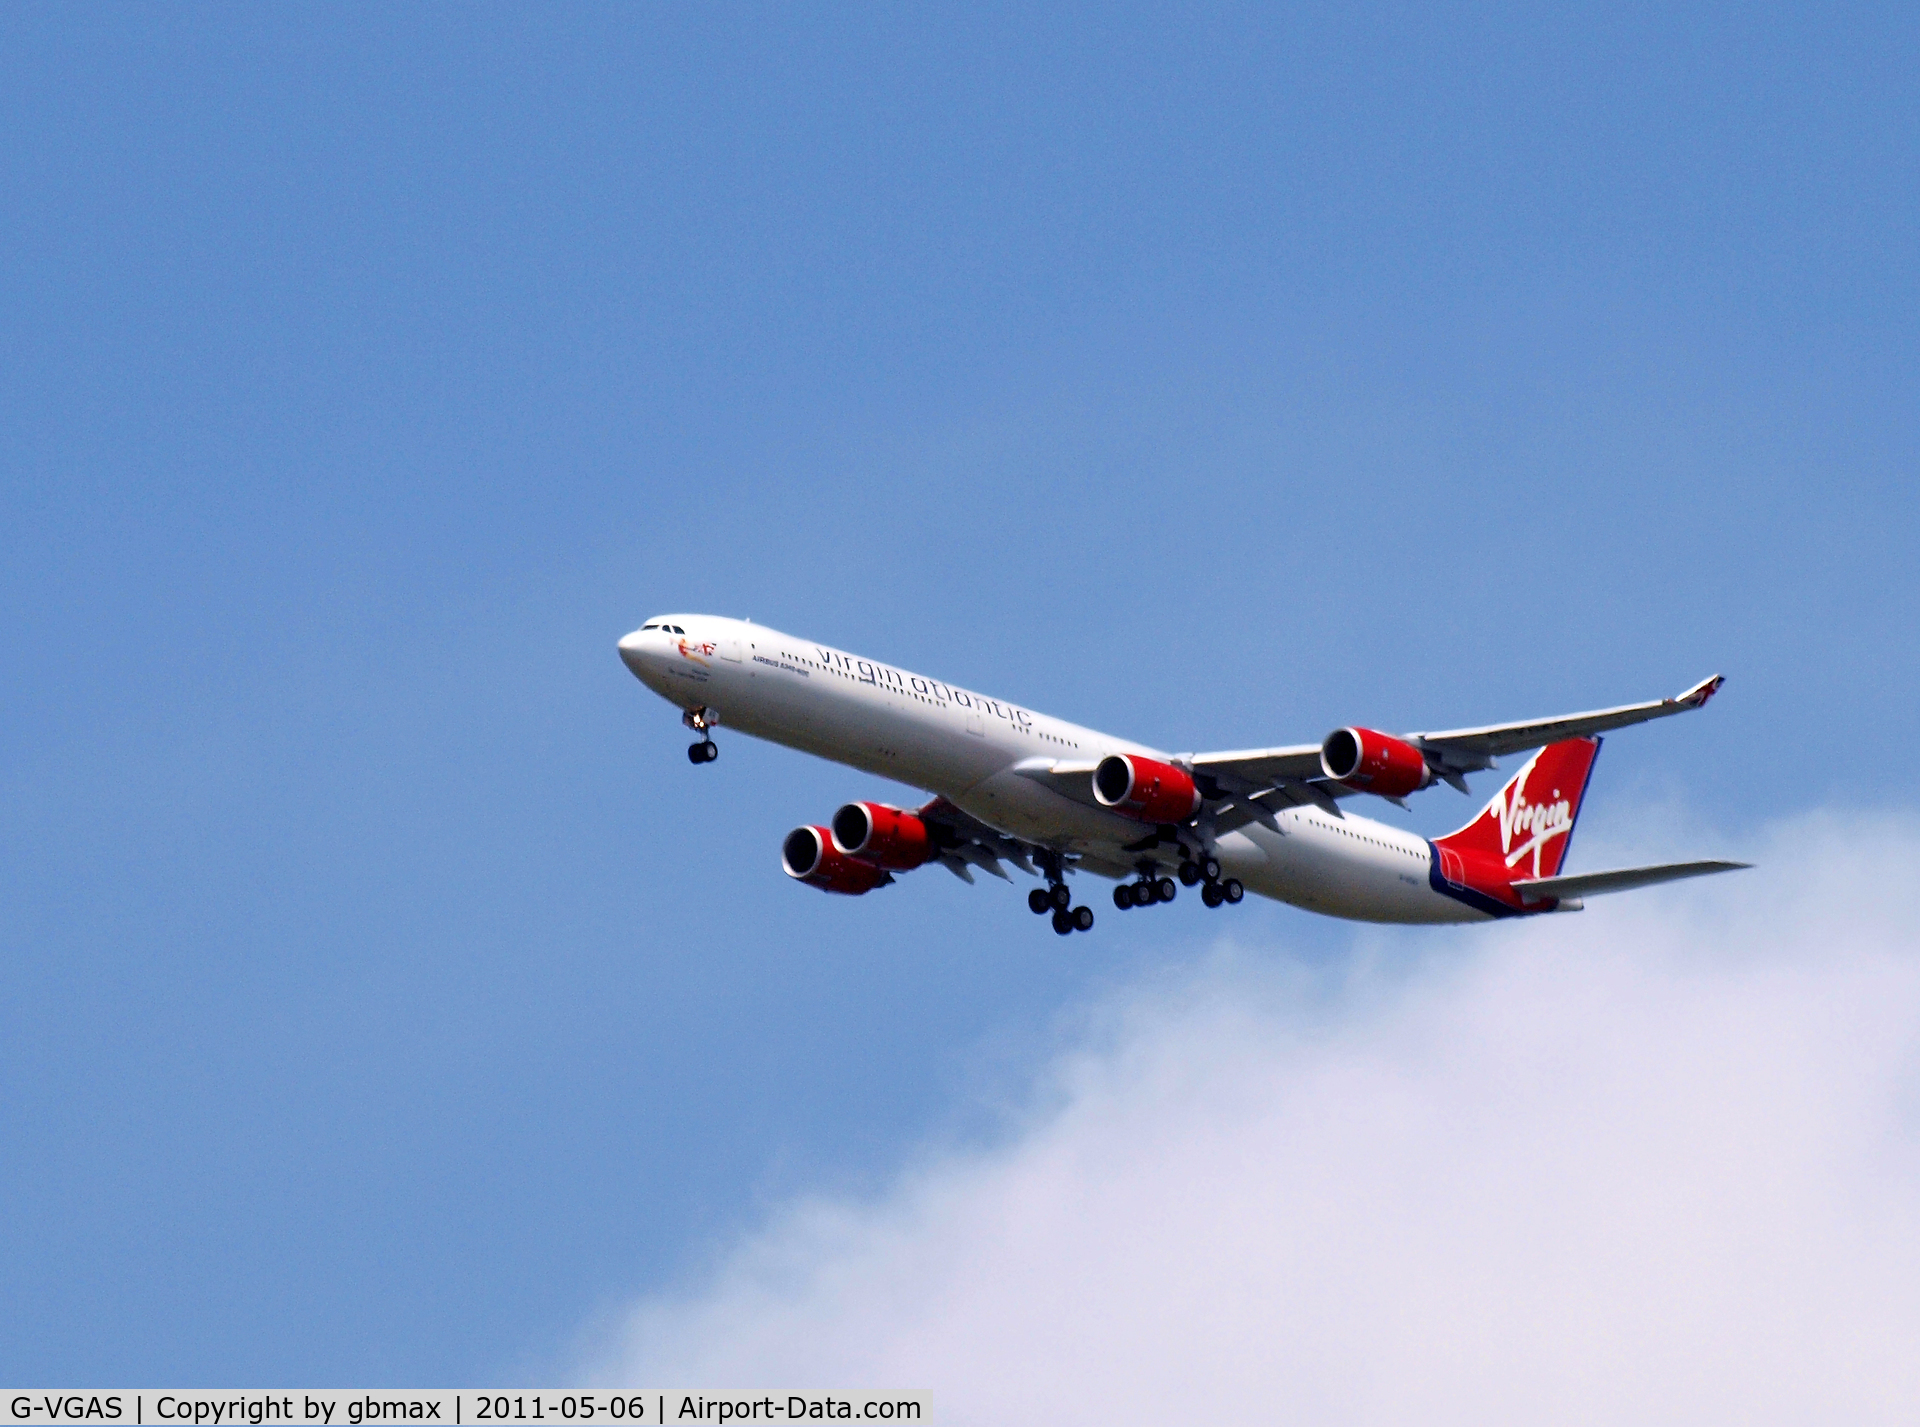 G-VGAS, 2005 Airbus A340-642 C/N 639, Flying over Mineola, NY, going to a landing at JFK